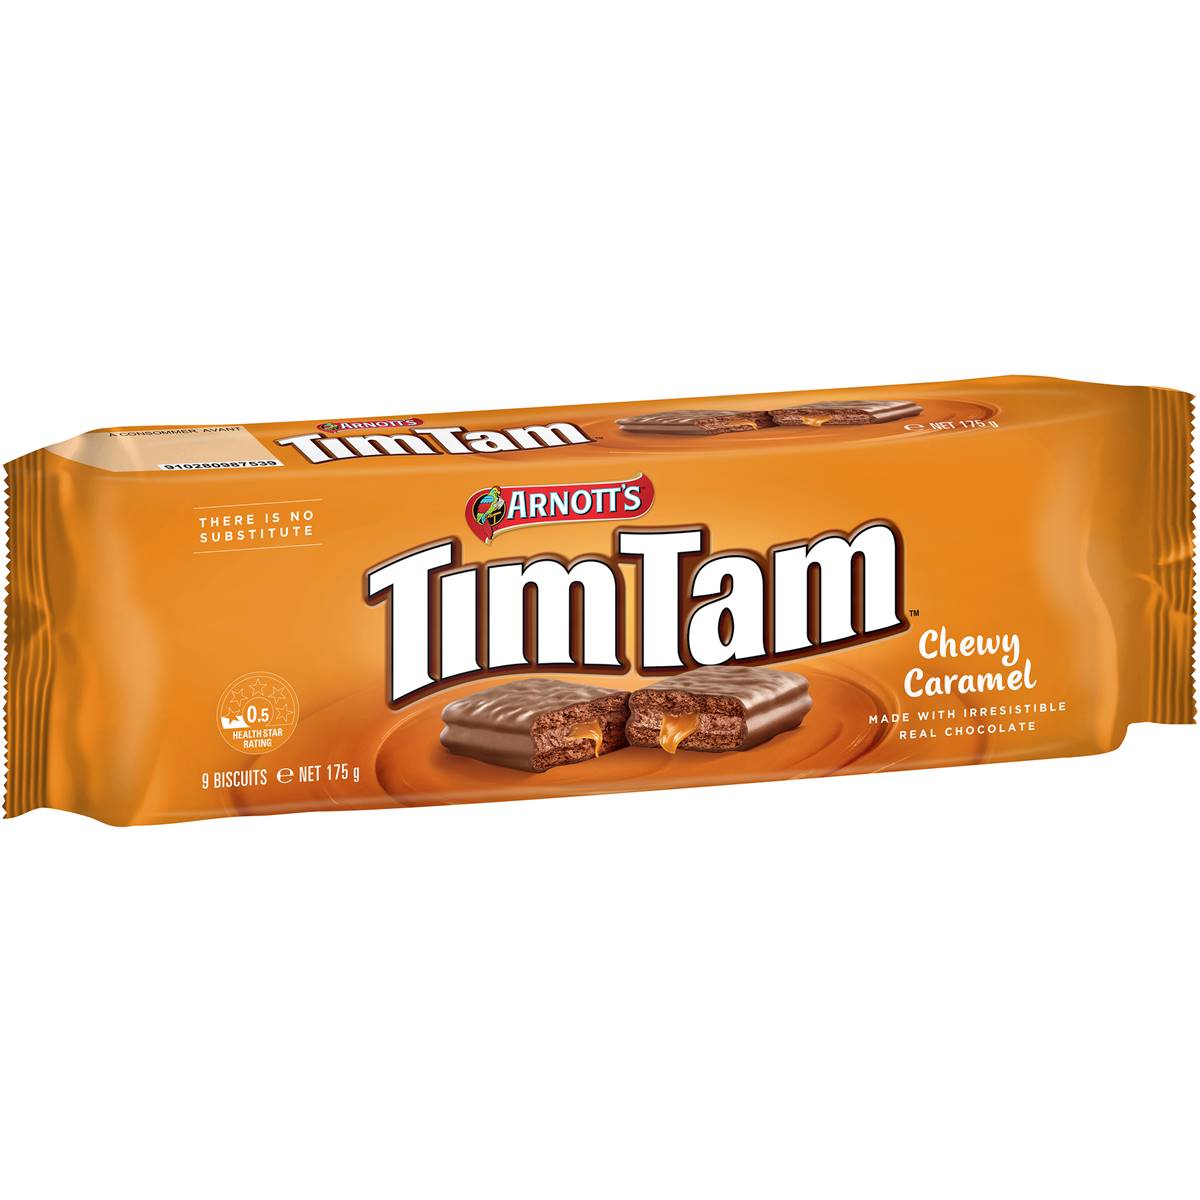 Arnott's Tim Tam Chocolate Biscuits, 175 Grams/6.2 Ounces, Chewy Caramel - image 1 of 6